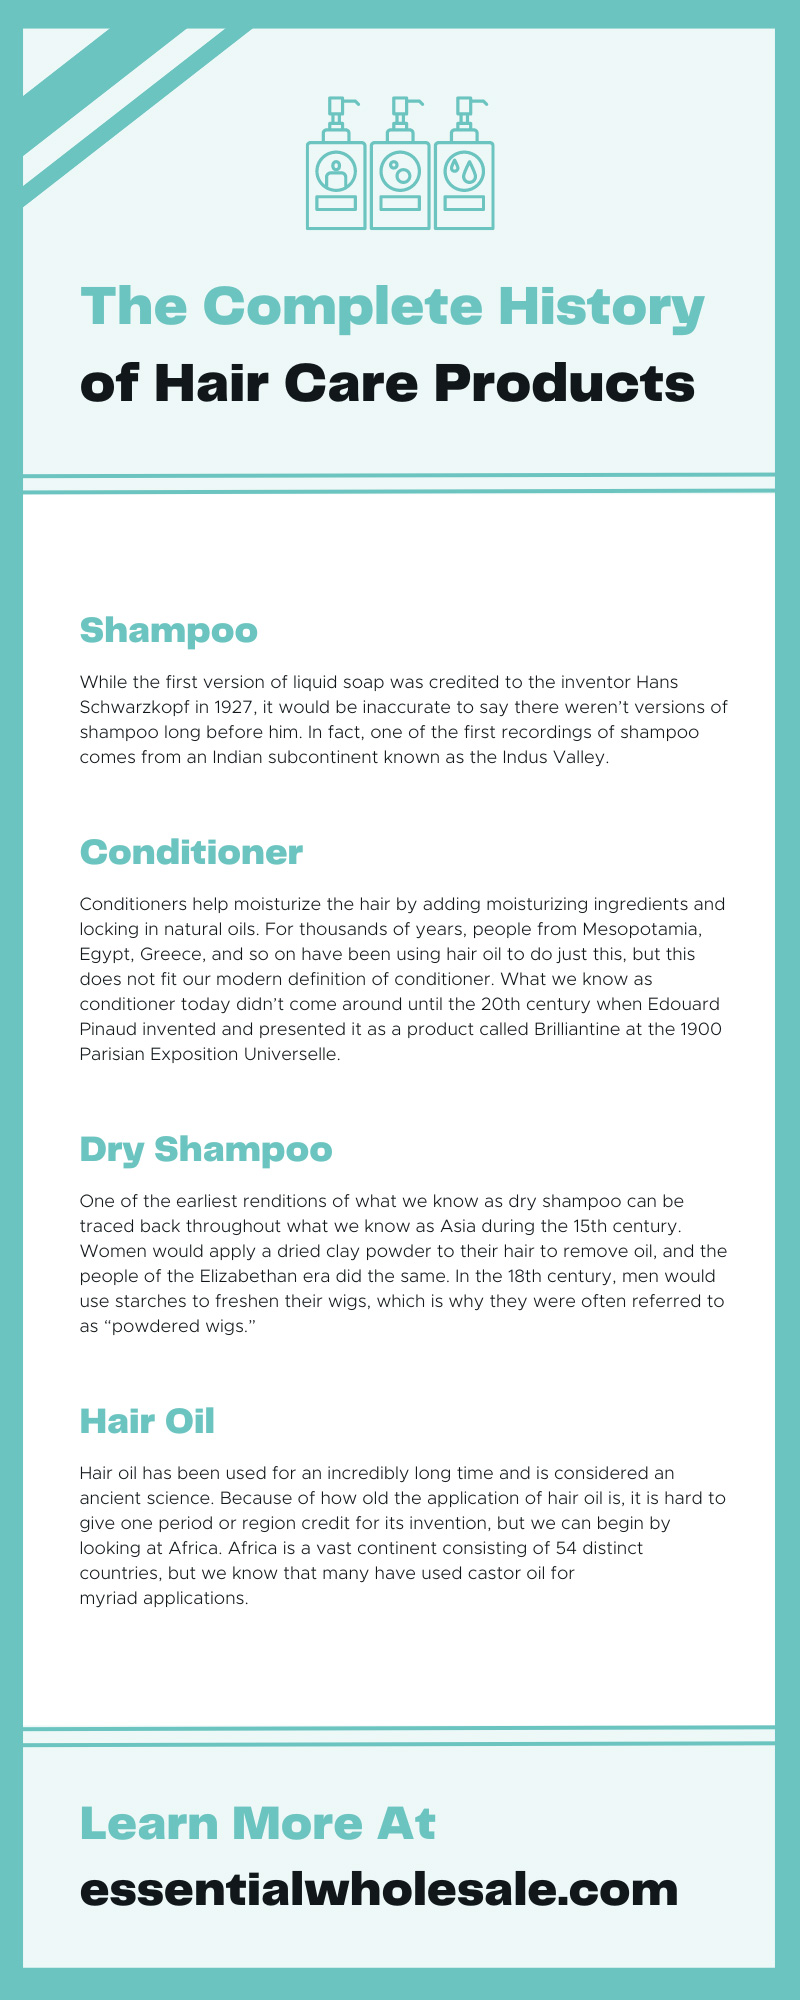 The Complete History of Hair Care Products